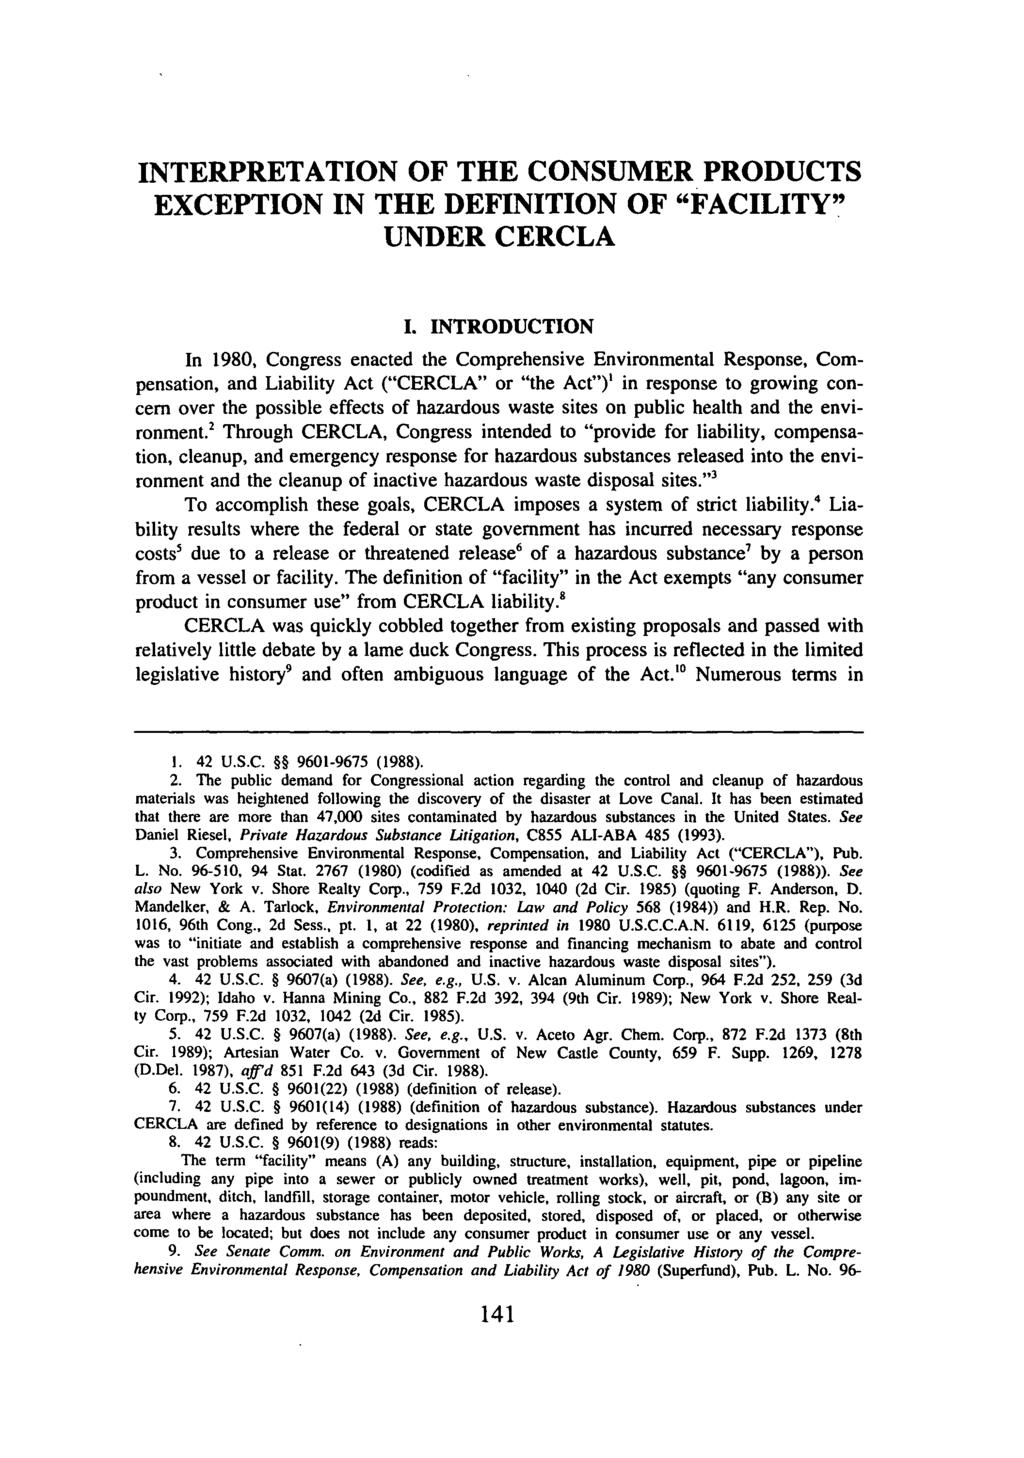 INTERPRETATION OF THE CONSUMER PRODUCTS EXCEPTION IN THE DEFINITION OF "FACILITY" UNDER CERCLA I.